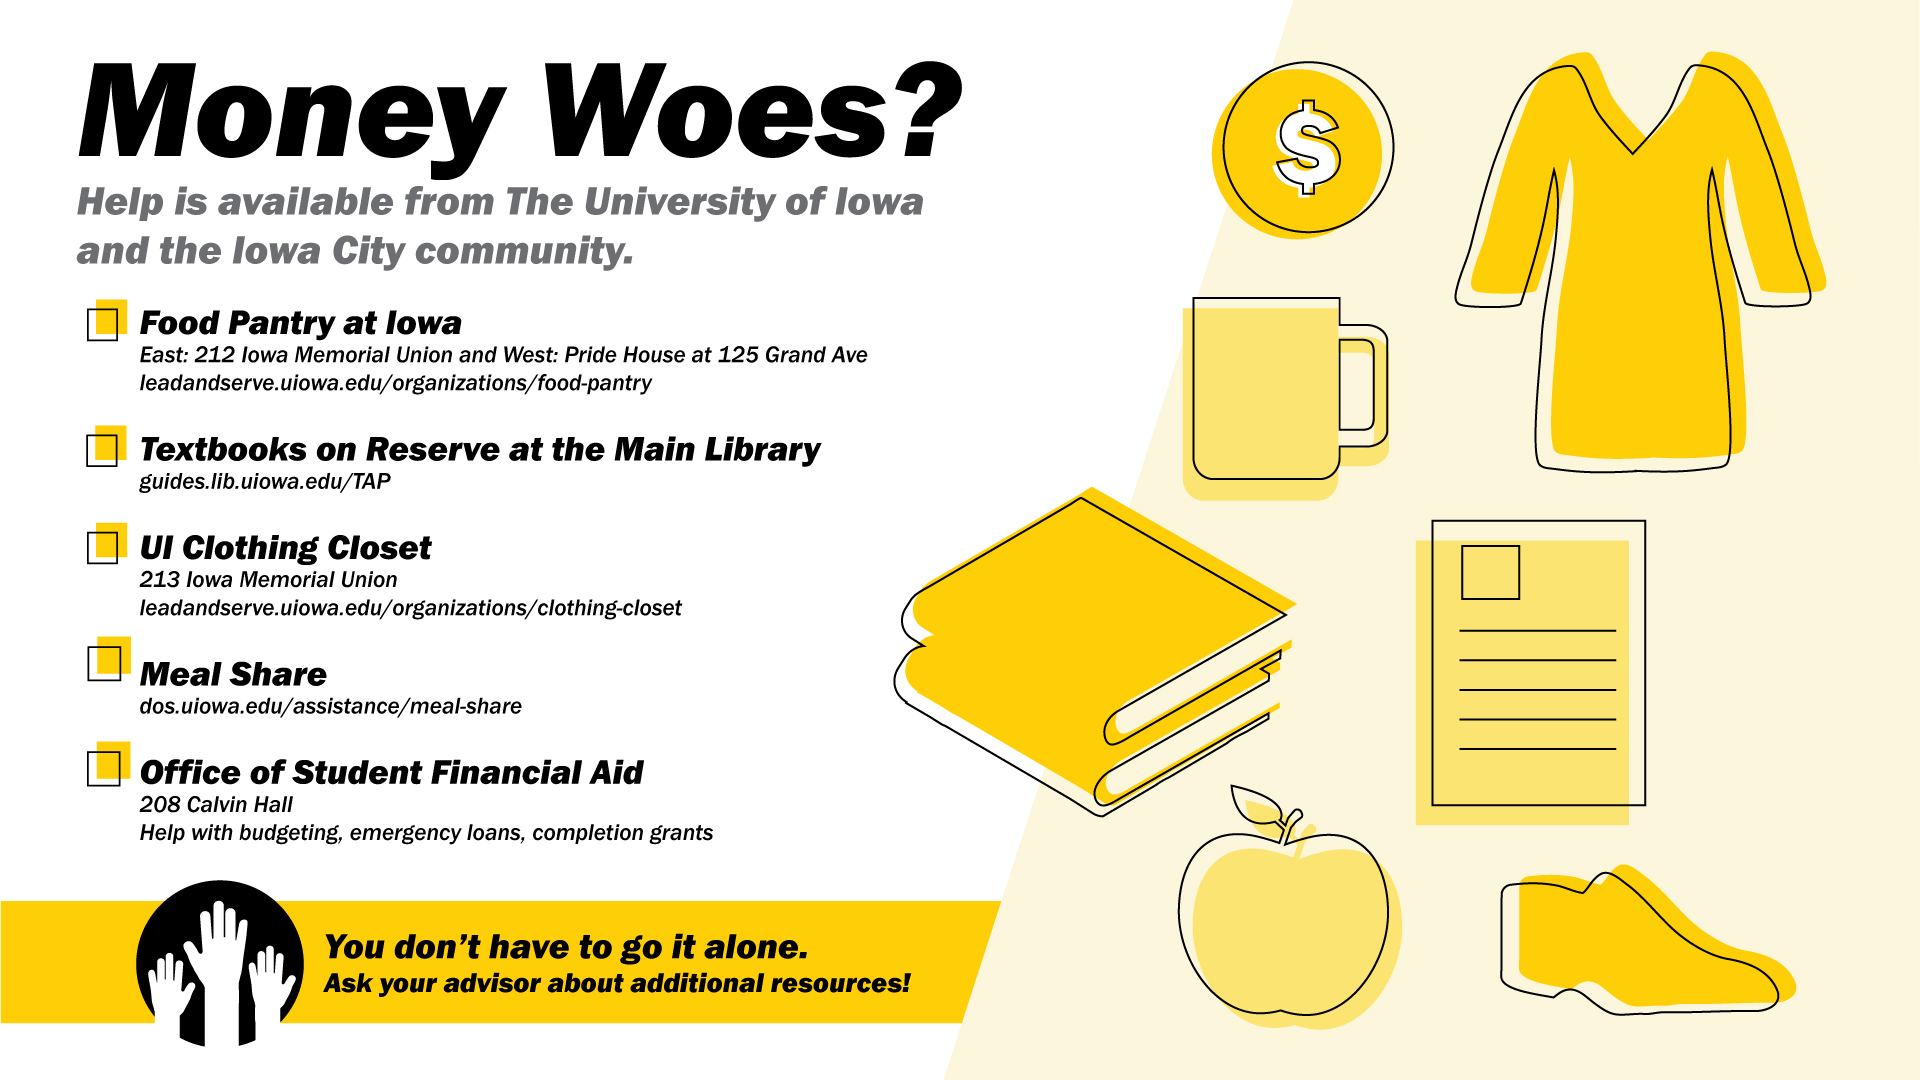 Money Woes? You don't have to do it alone. Ask your advisor about additional resources!